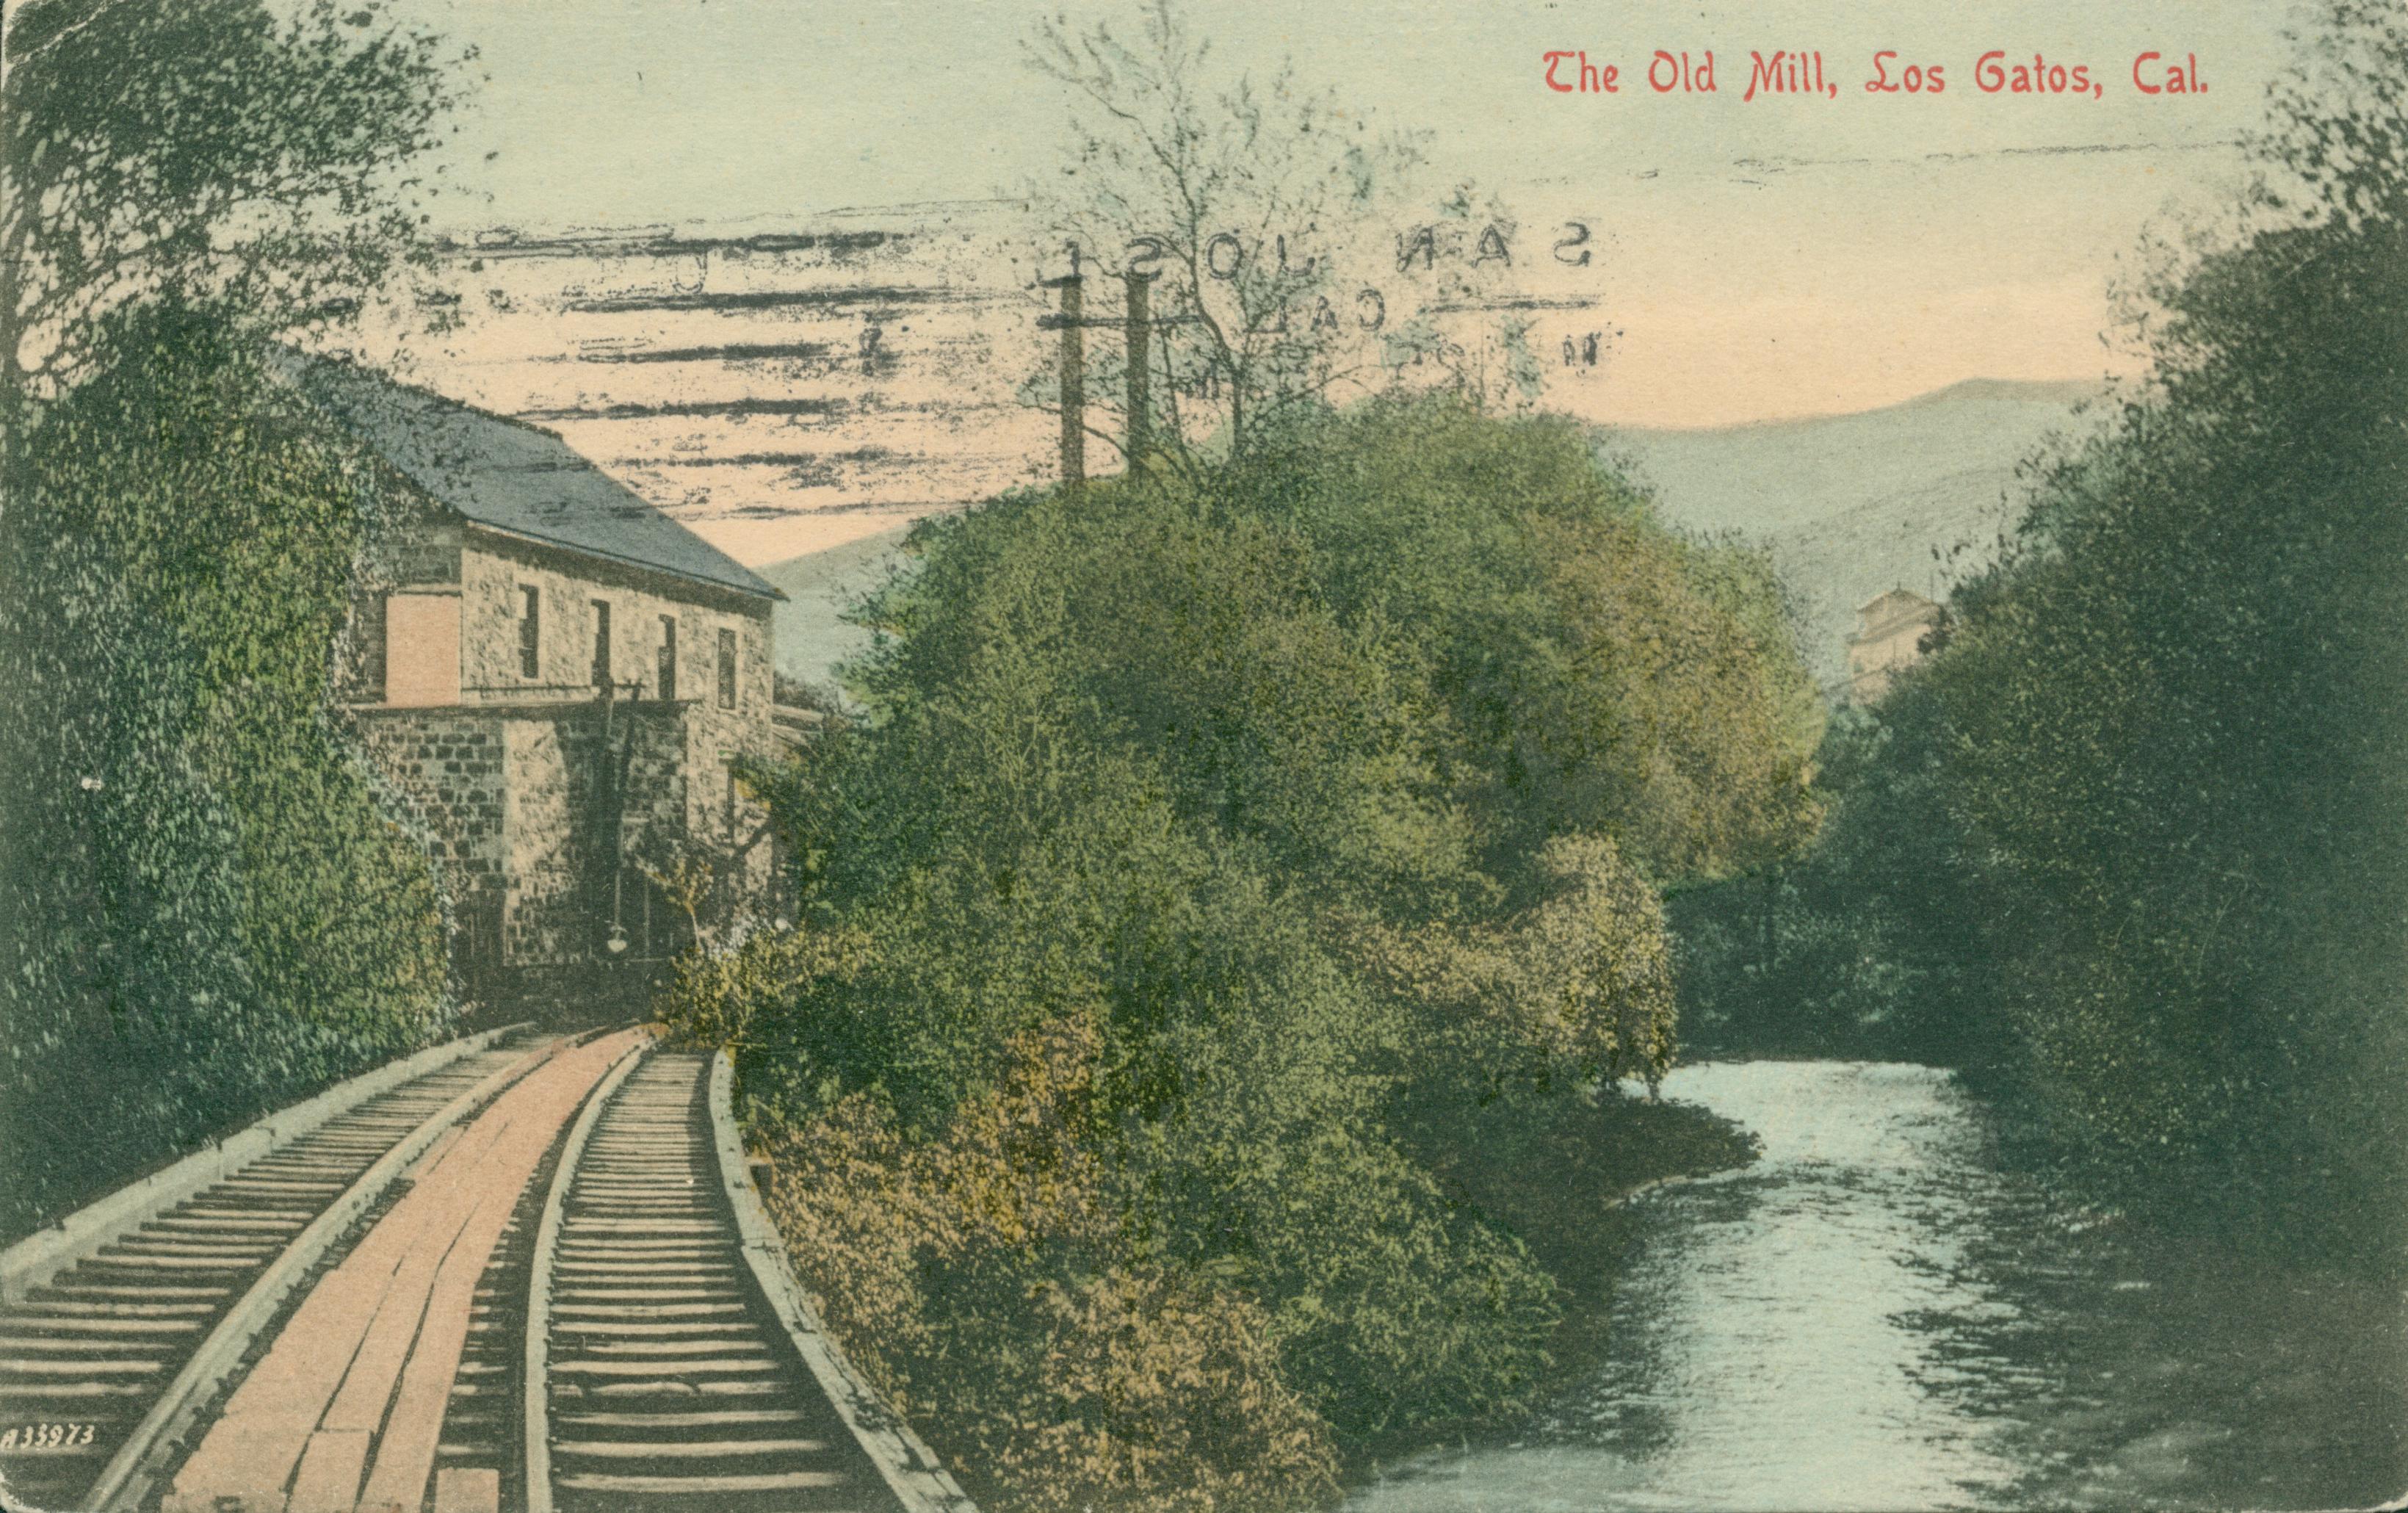 Double railroad tracks leading to stone mill, bushes and tree surrounding building and track, small creek to the right of the tracks and mill, trees on either bank of the creek, hills in the background